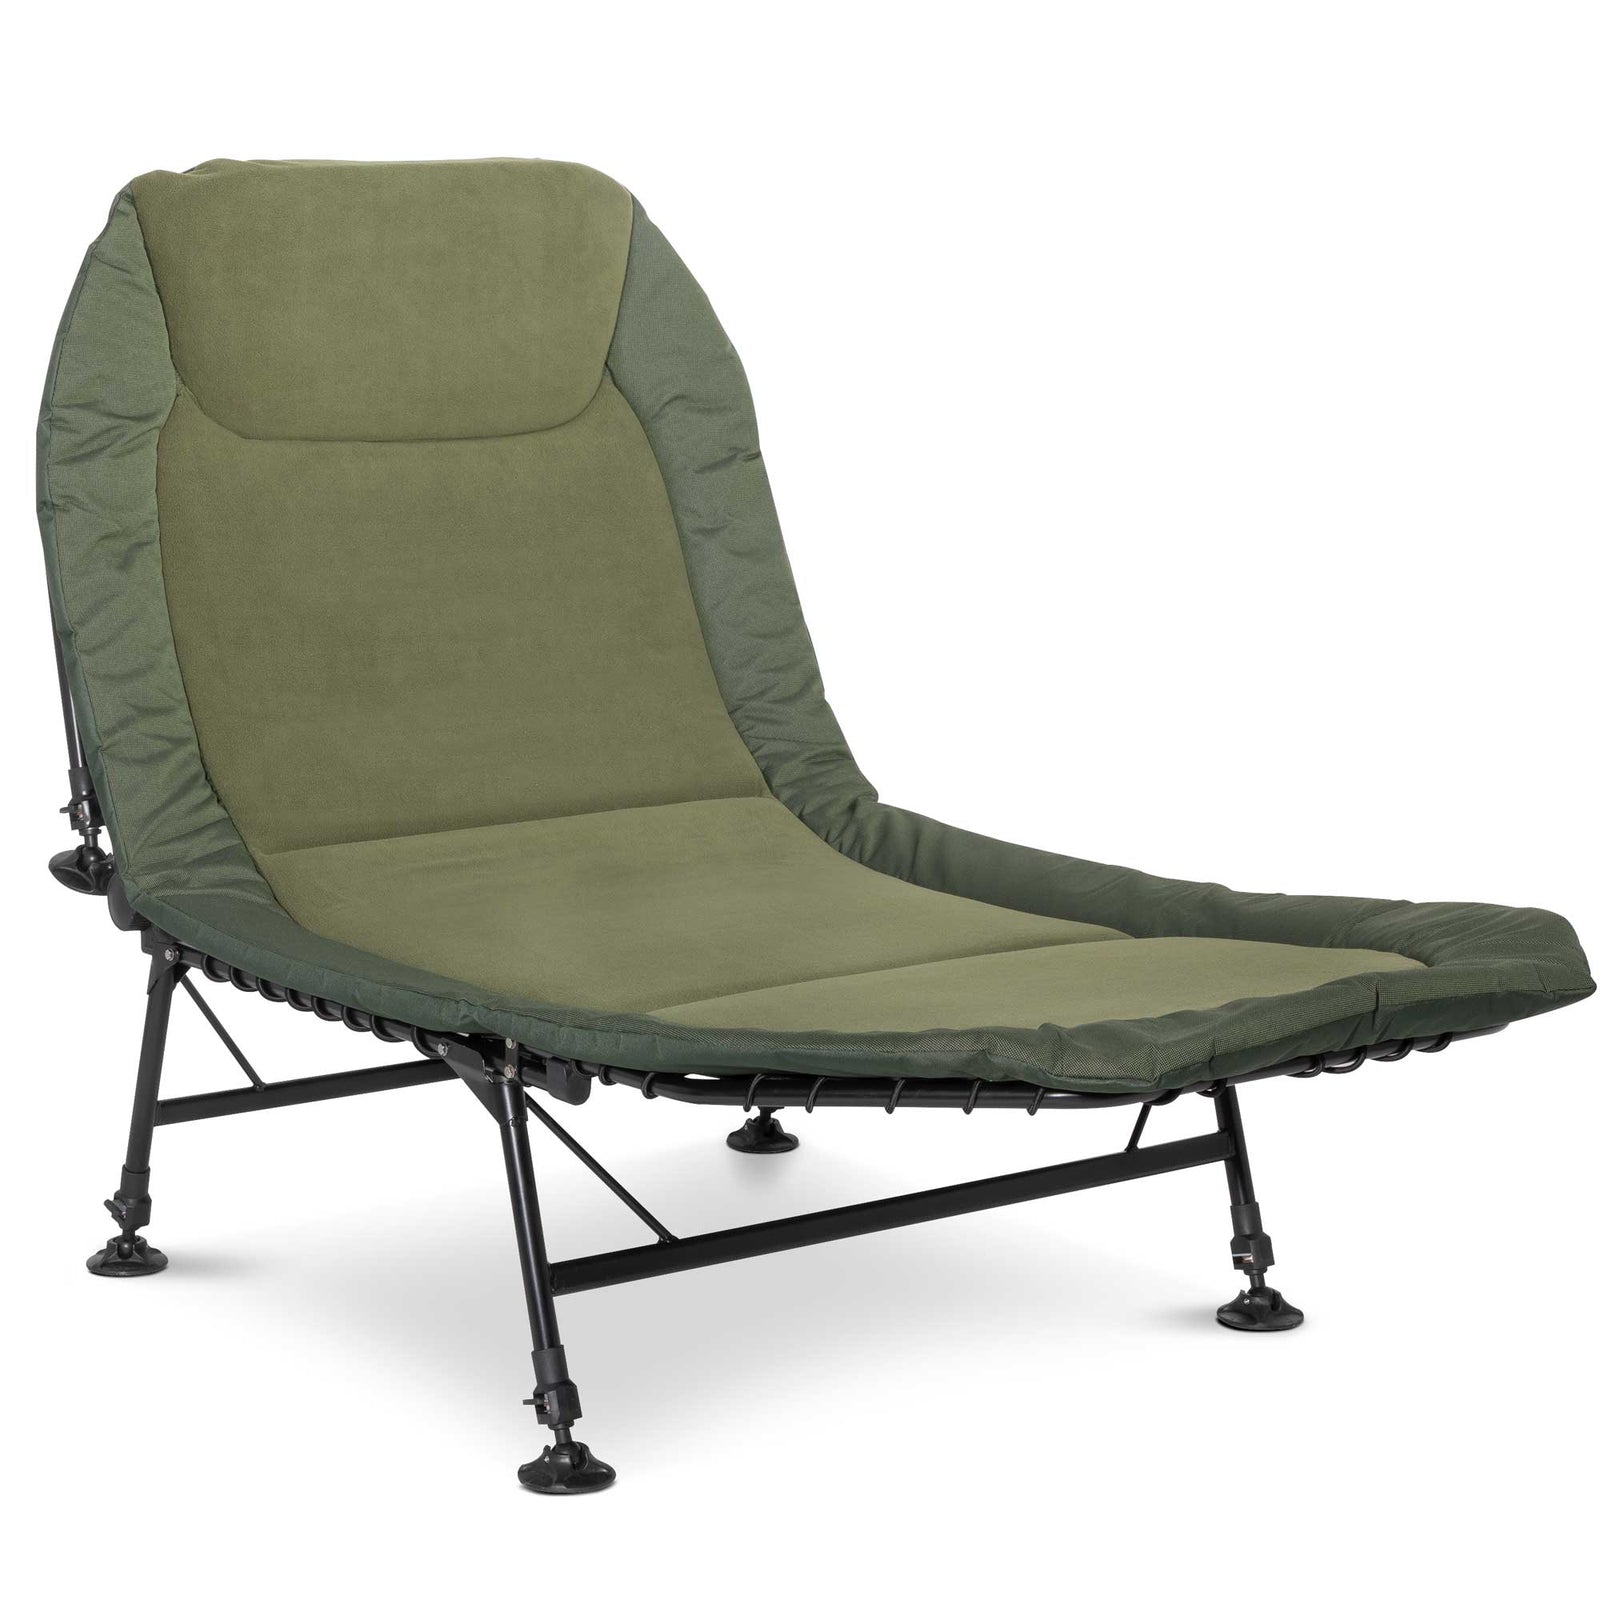 NGT Specimen Bed - 6 Leg Bed Chair with Recliner and Pillow